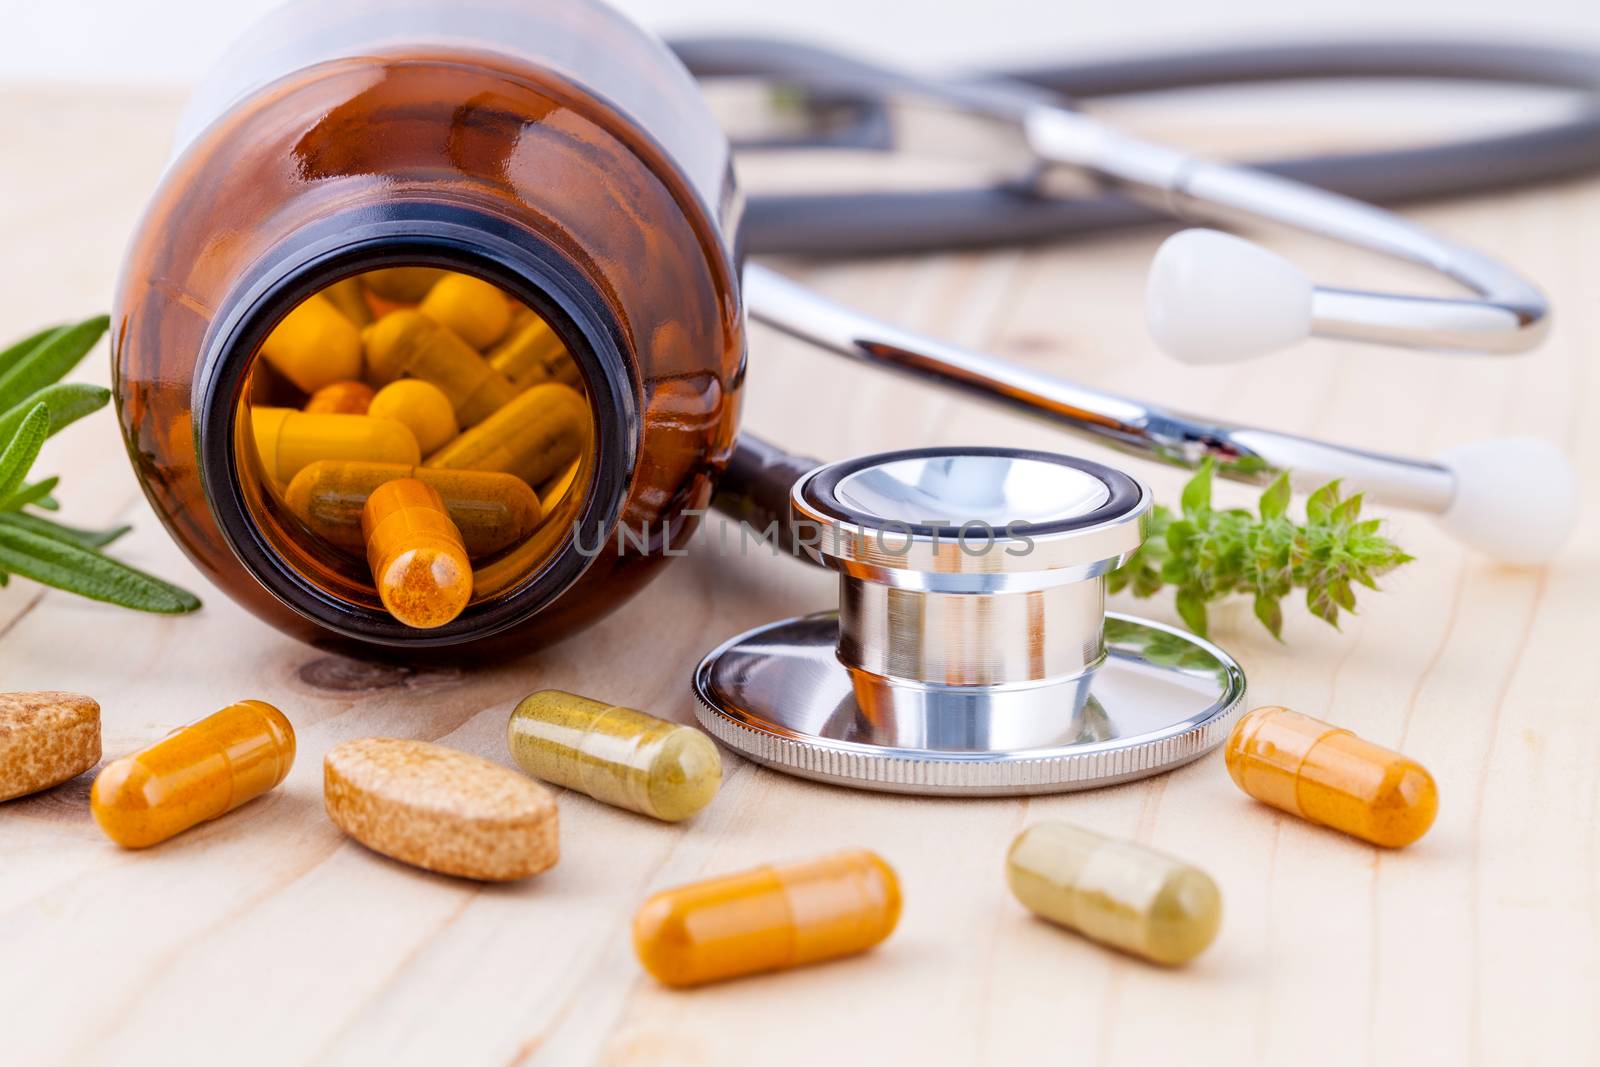 capsule of herbal medicine alternative healthy care with stethoscope wooden background.